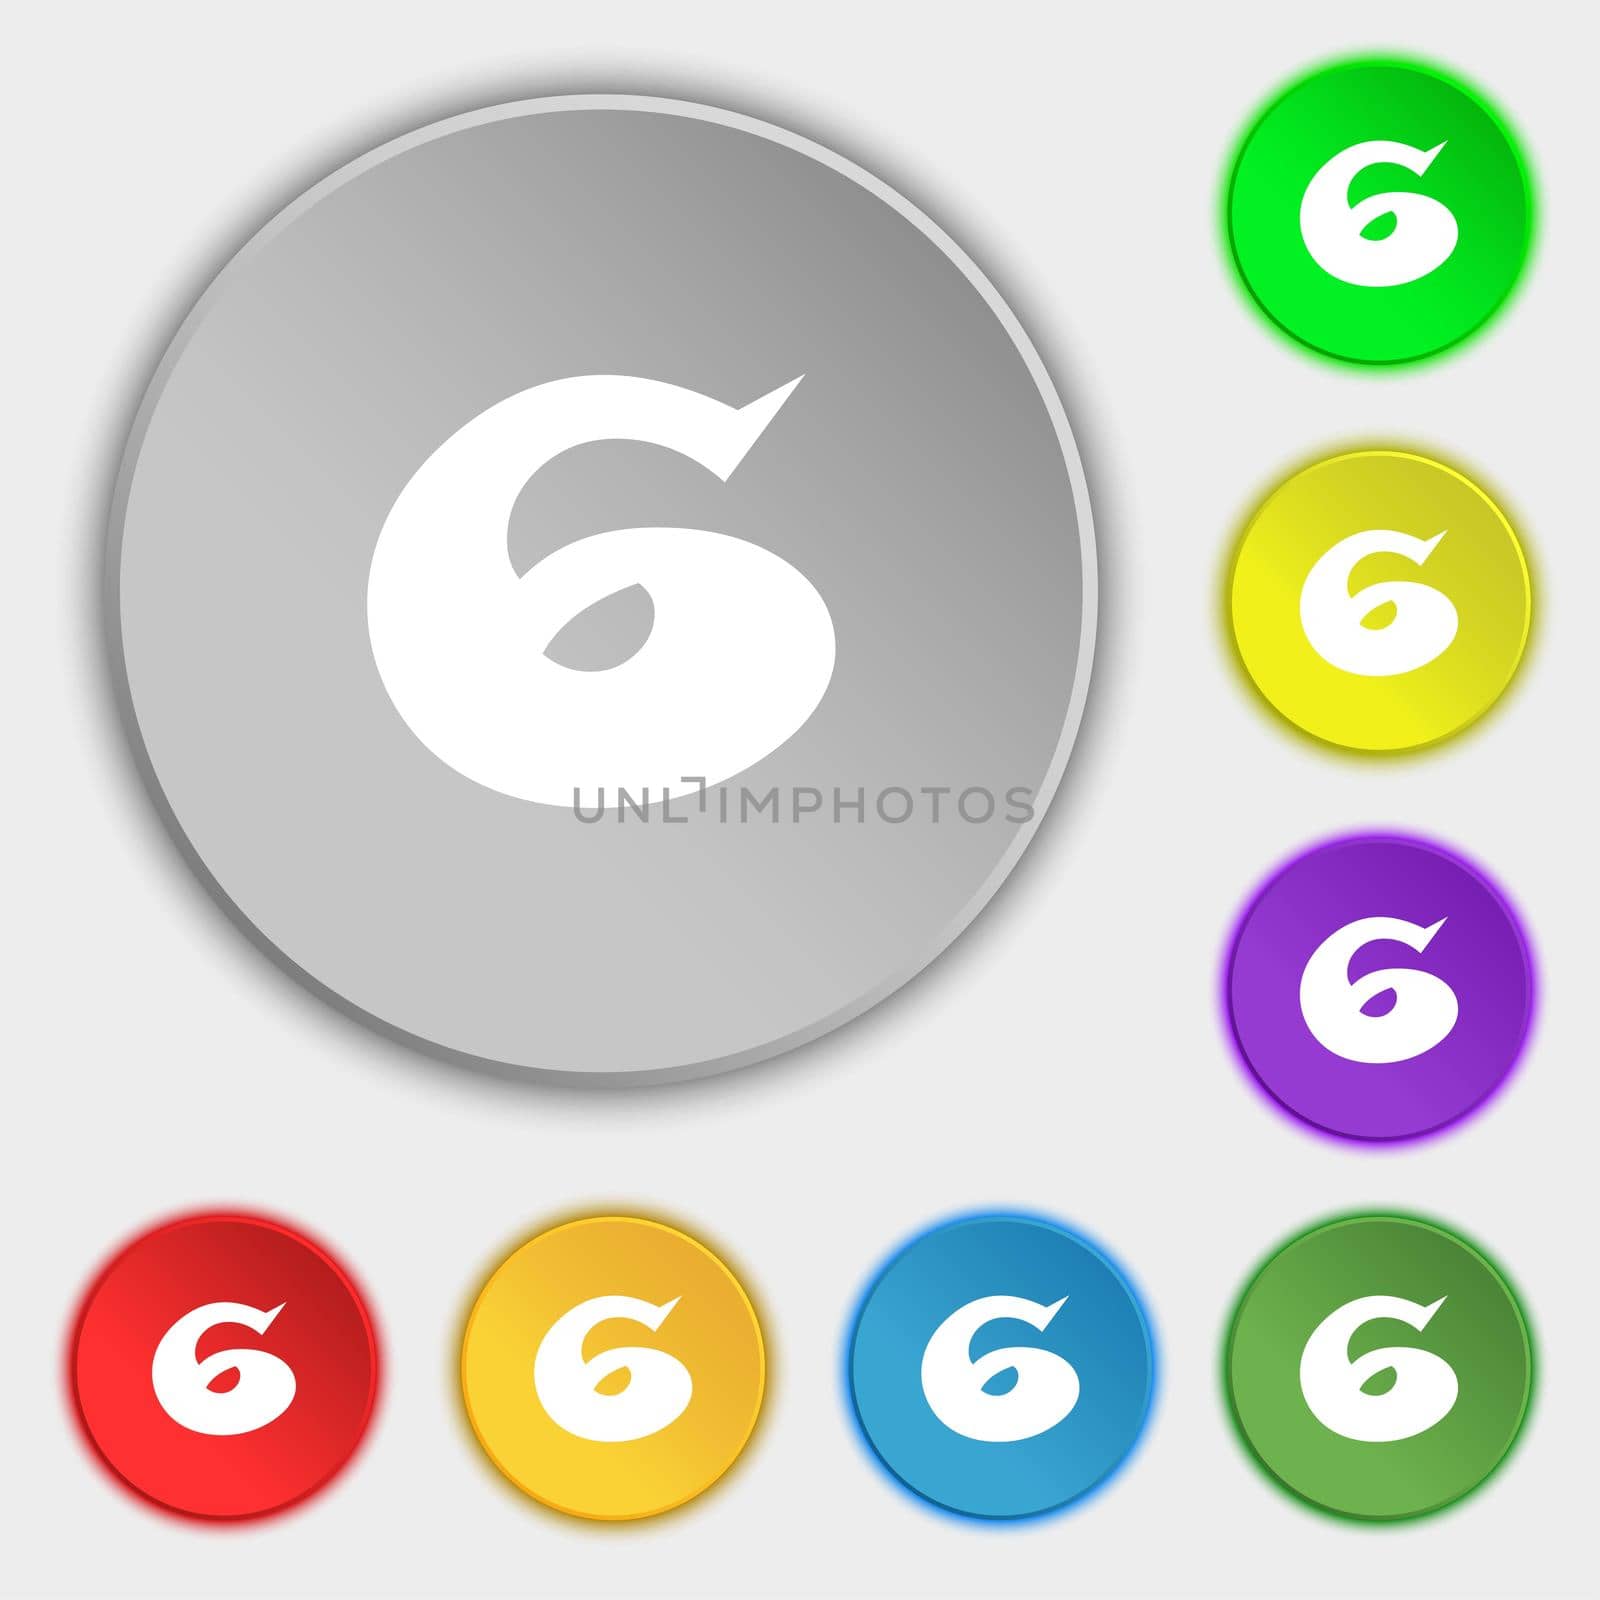 number six icon sign. Symbols on eight flat buttons. illustration